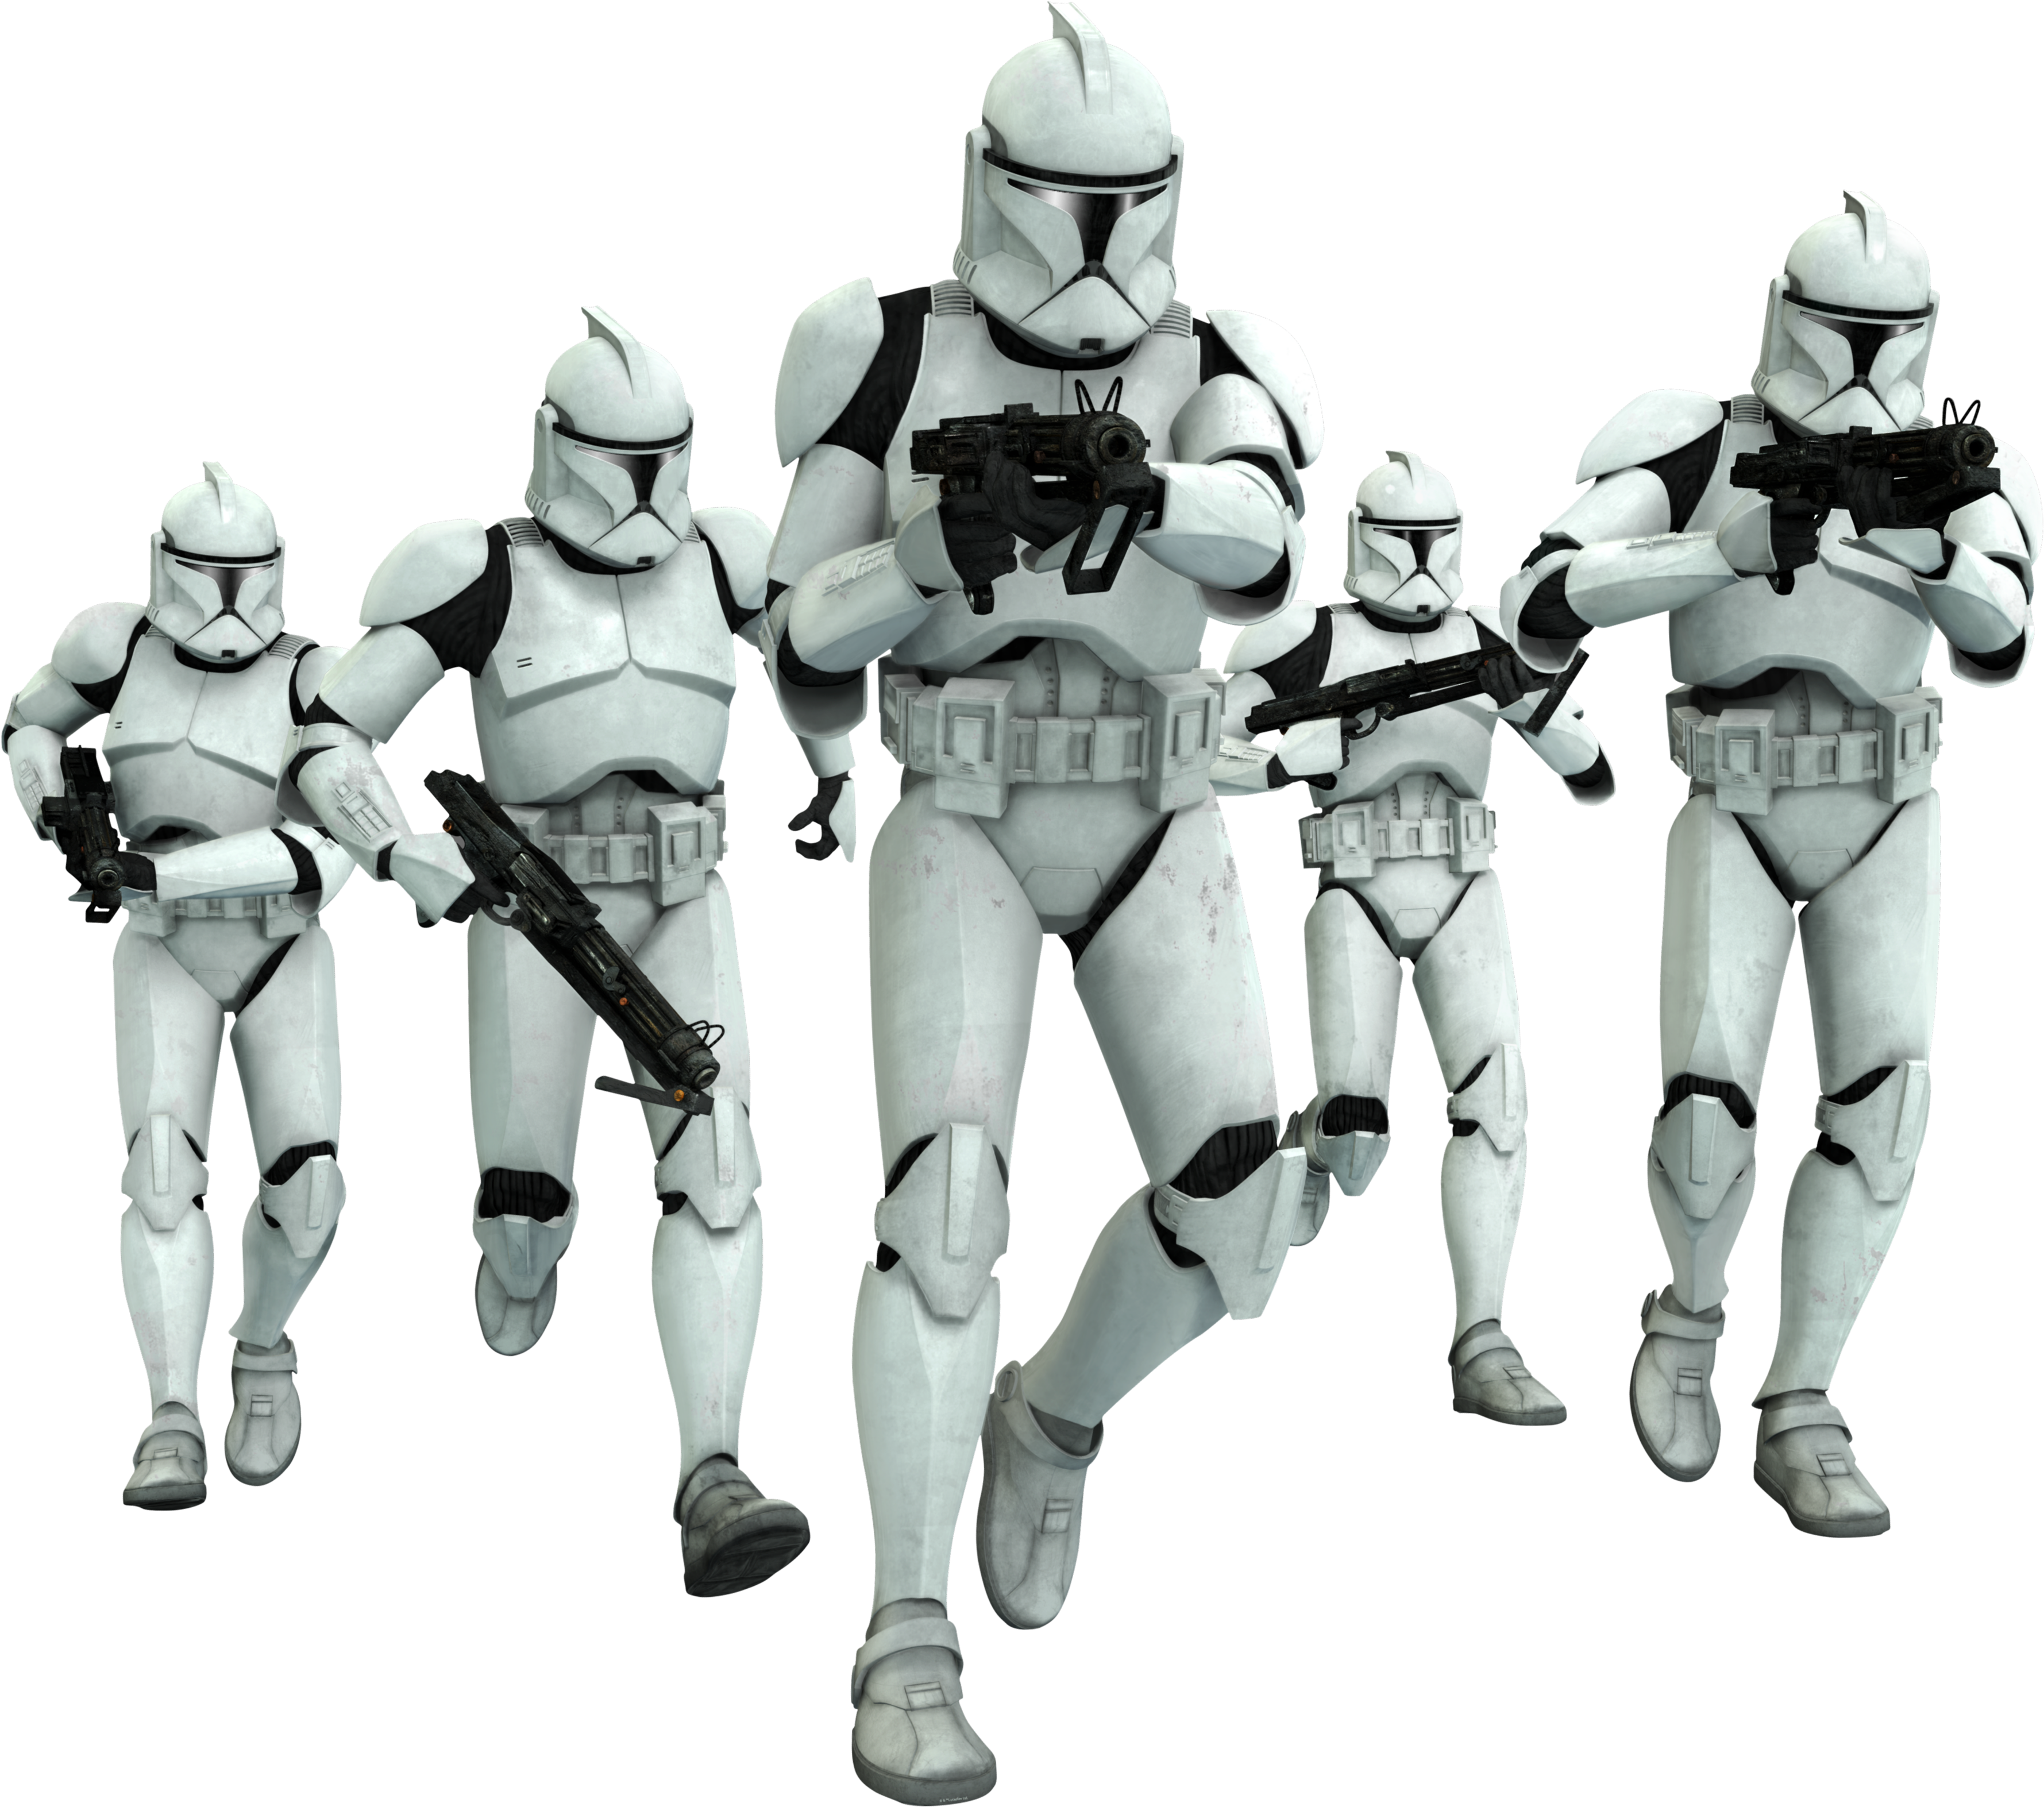 A Group Of People In White Clothing Holding Guns